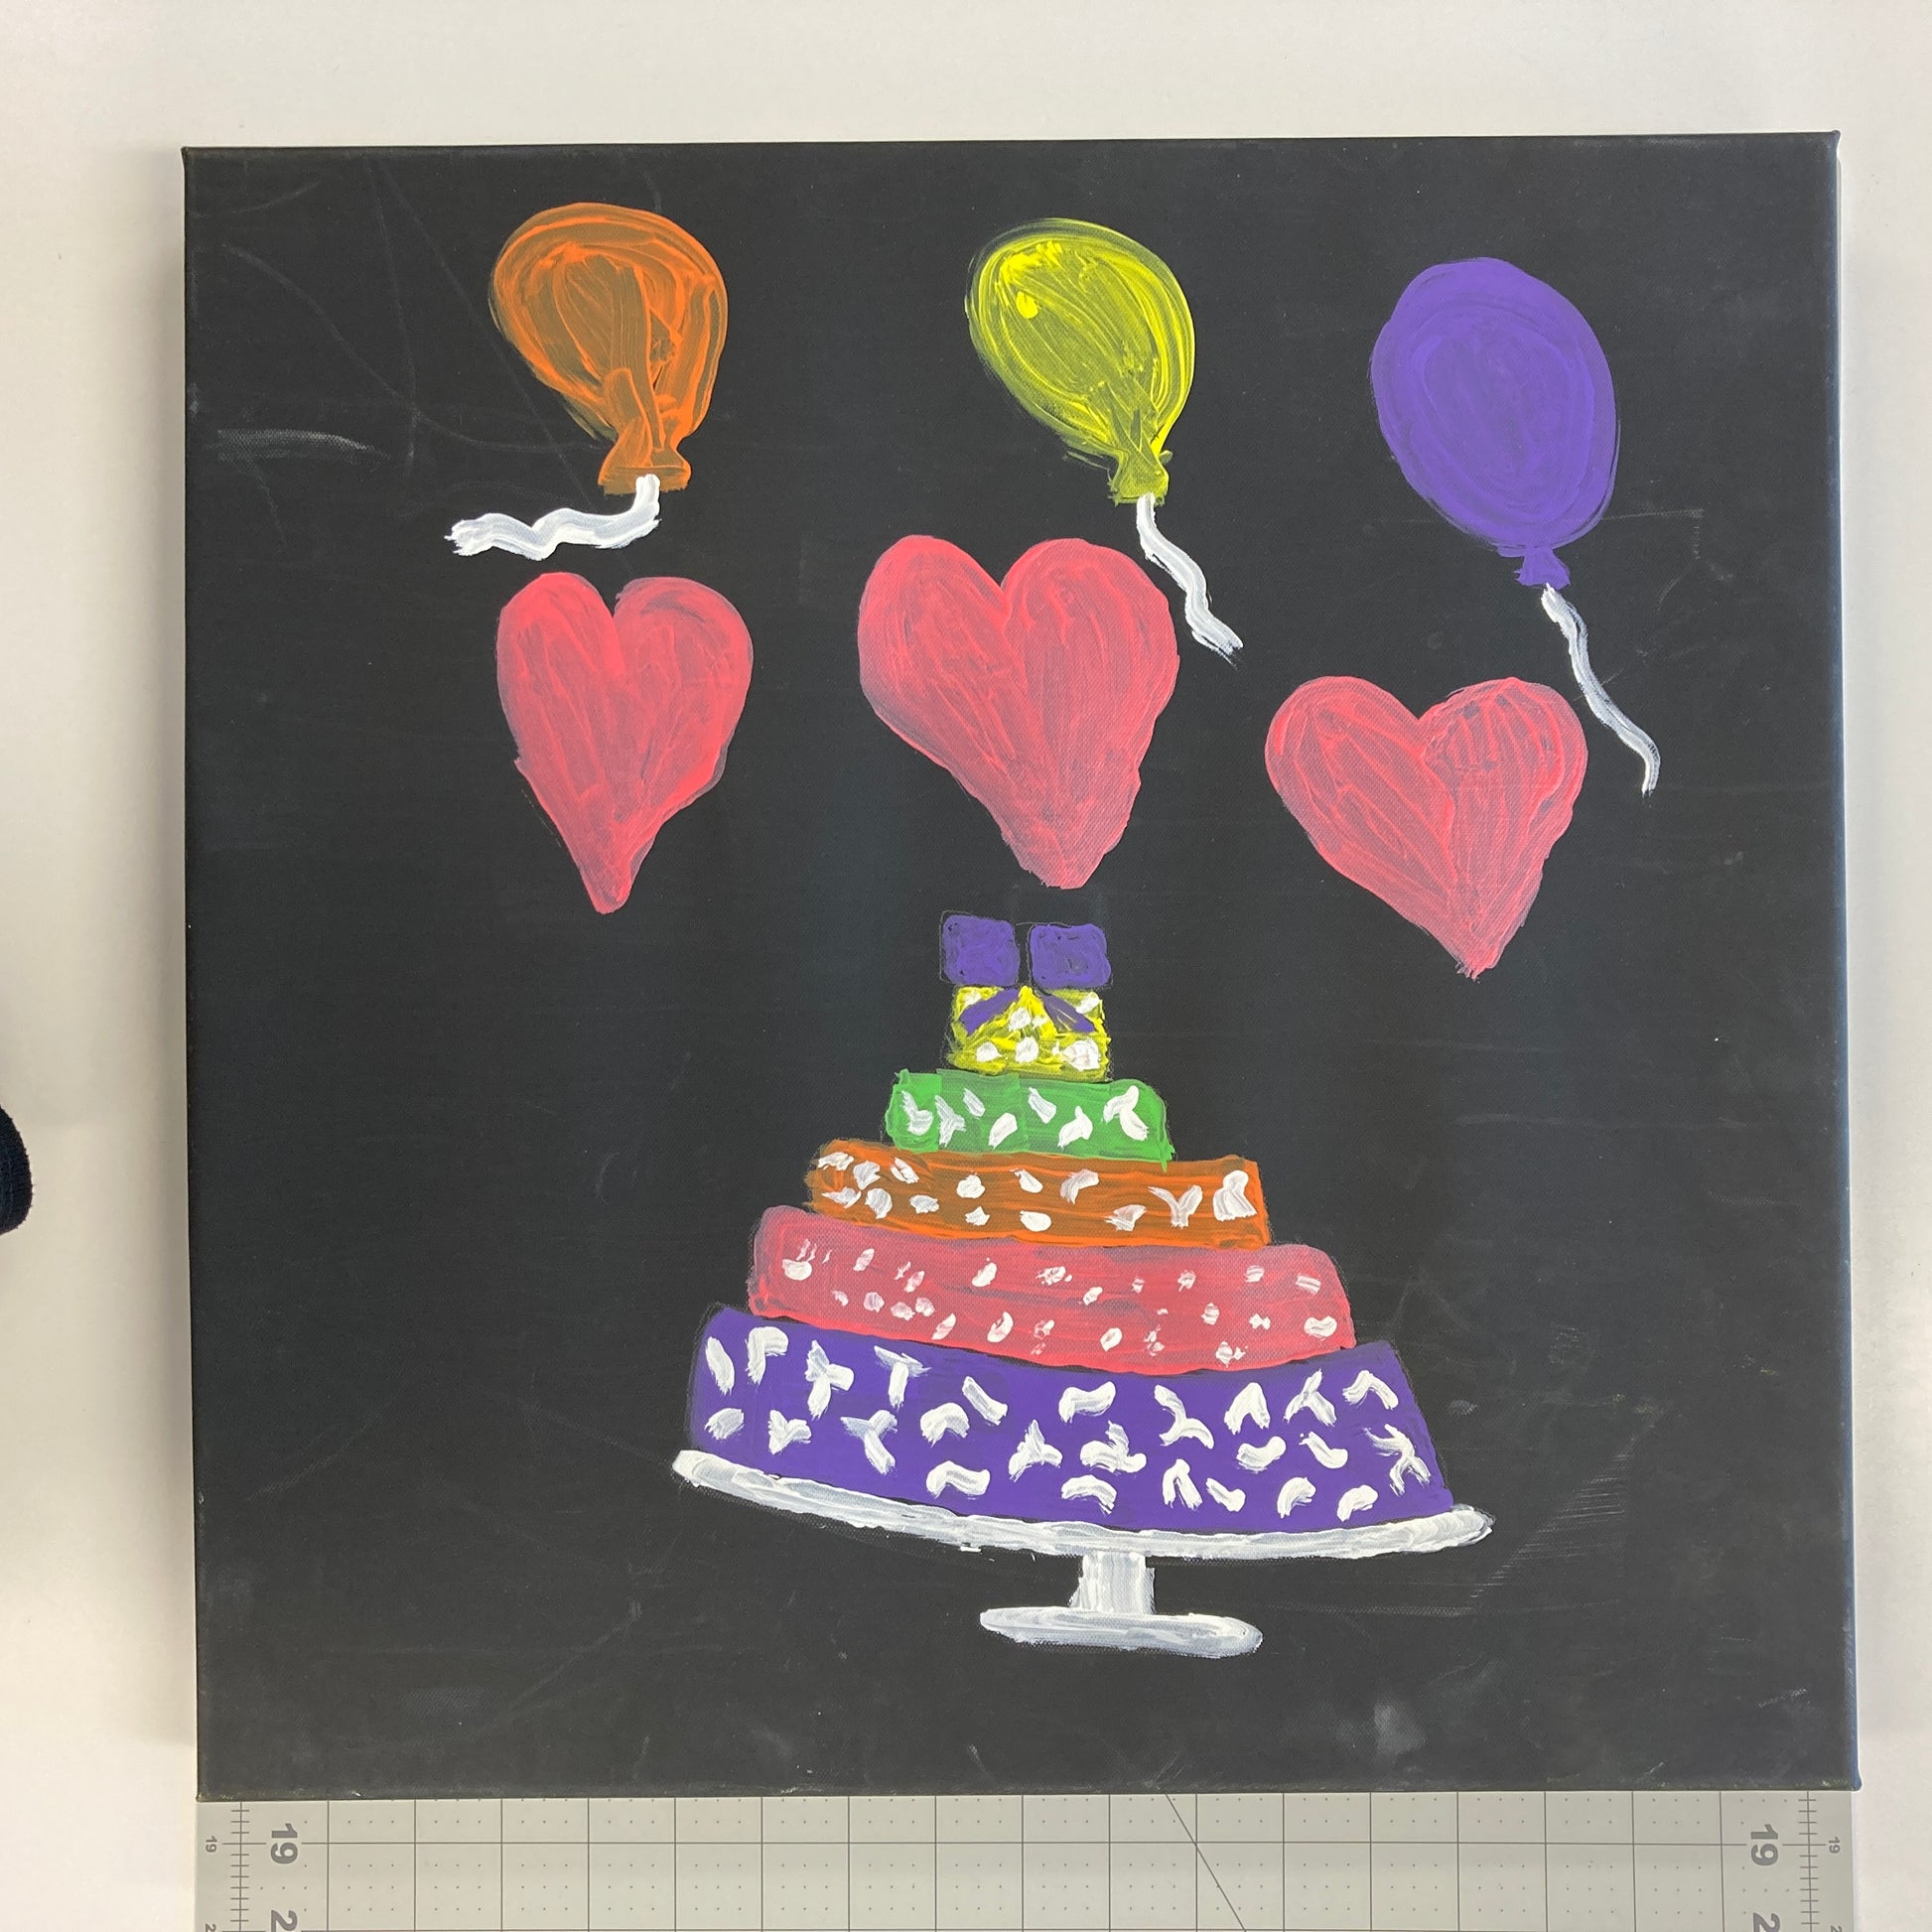 WATCH Resources Art Guild - Acrylic Paint on Stretched Canvas, 18 x 18 Original Fine Art, Birthday Cake Party made by Jim Wilbanks